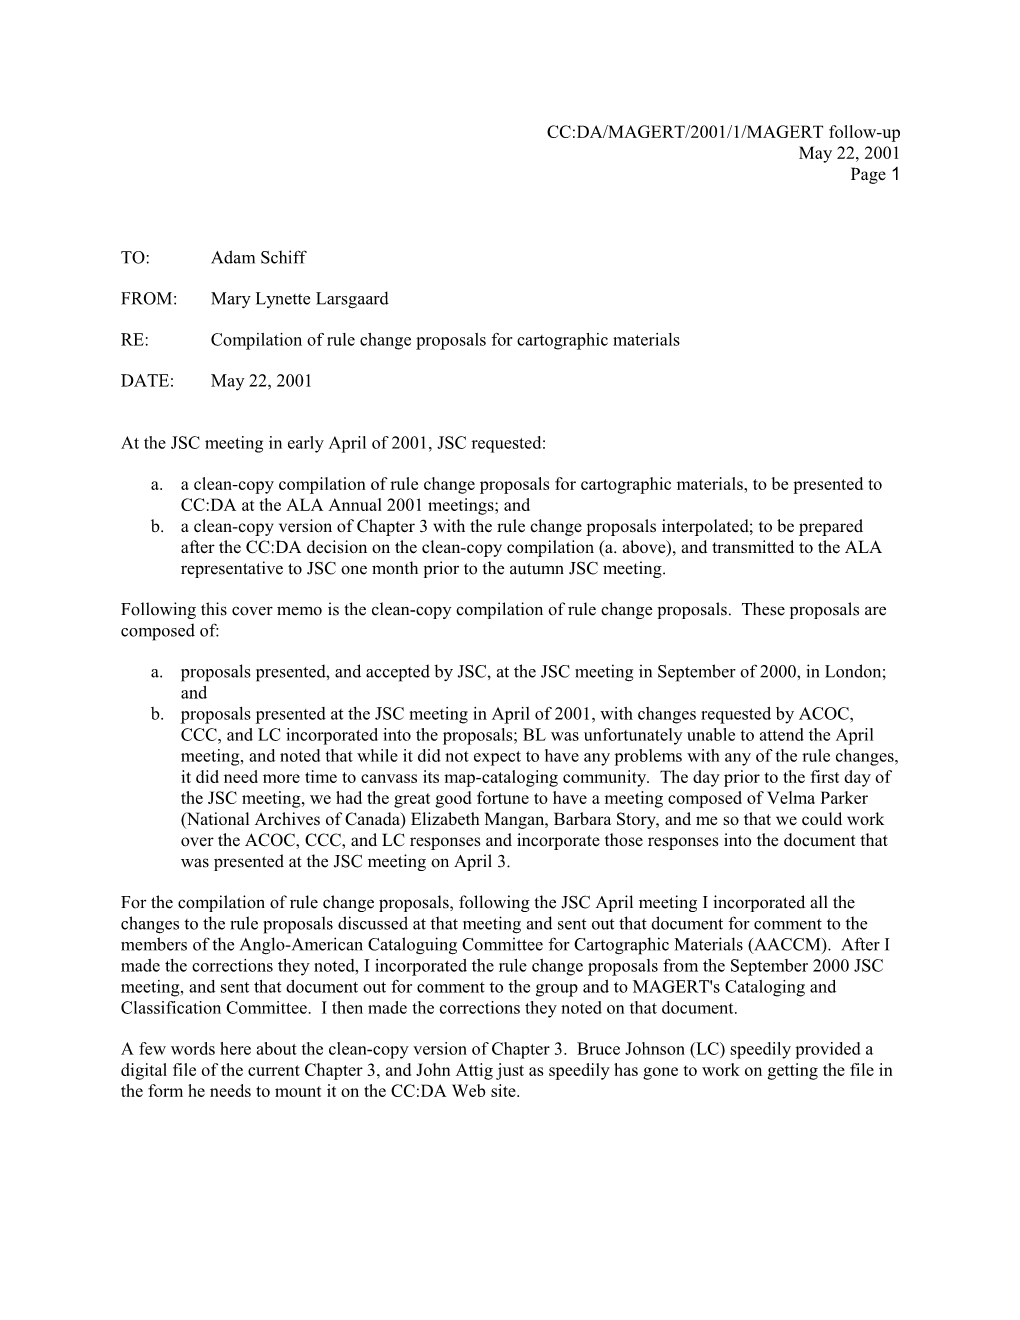 October 2000 Compilation of Rule Proposals to Go to Ala Cc:Da 12/1/2000